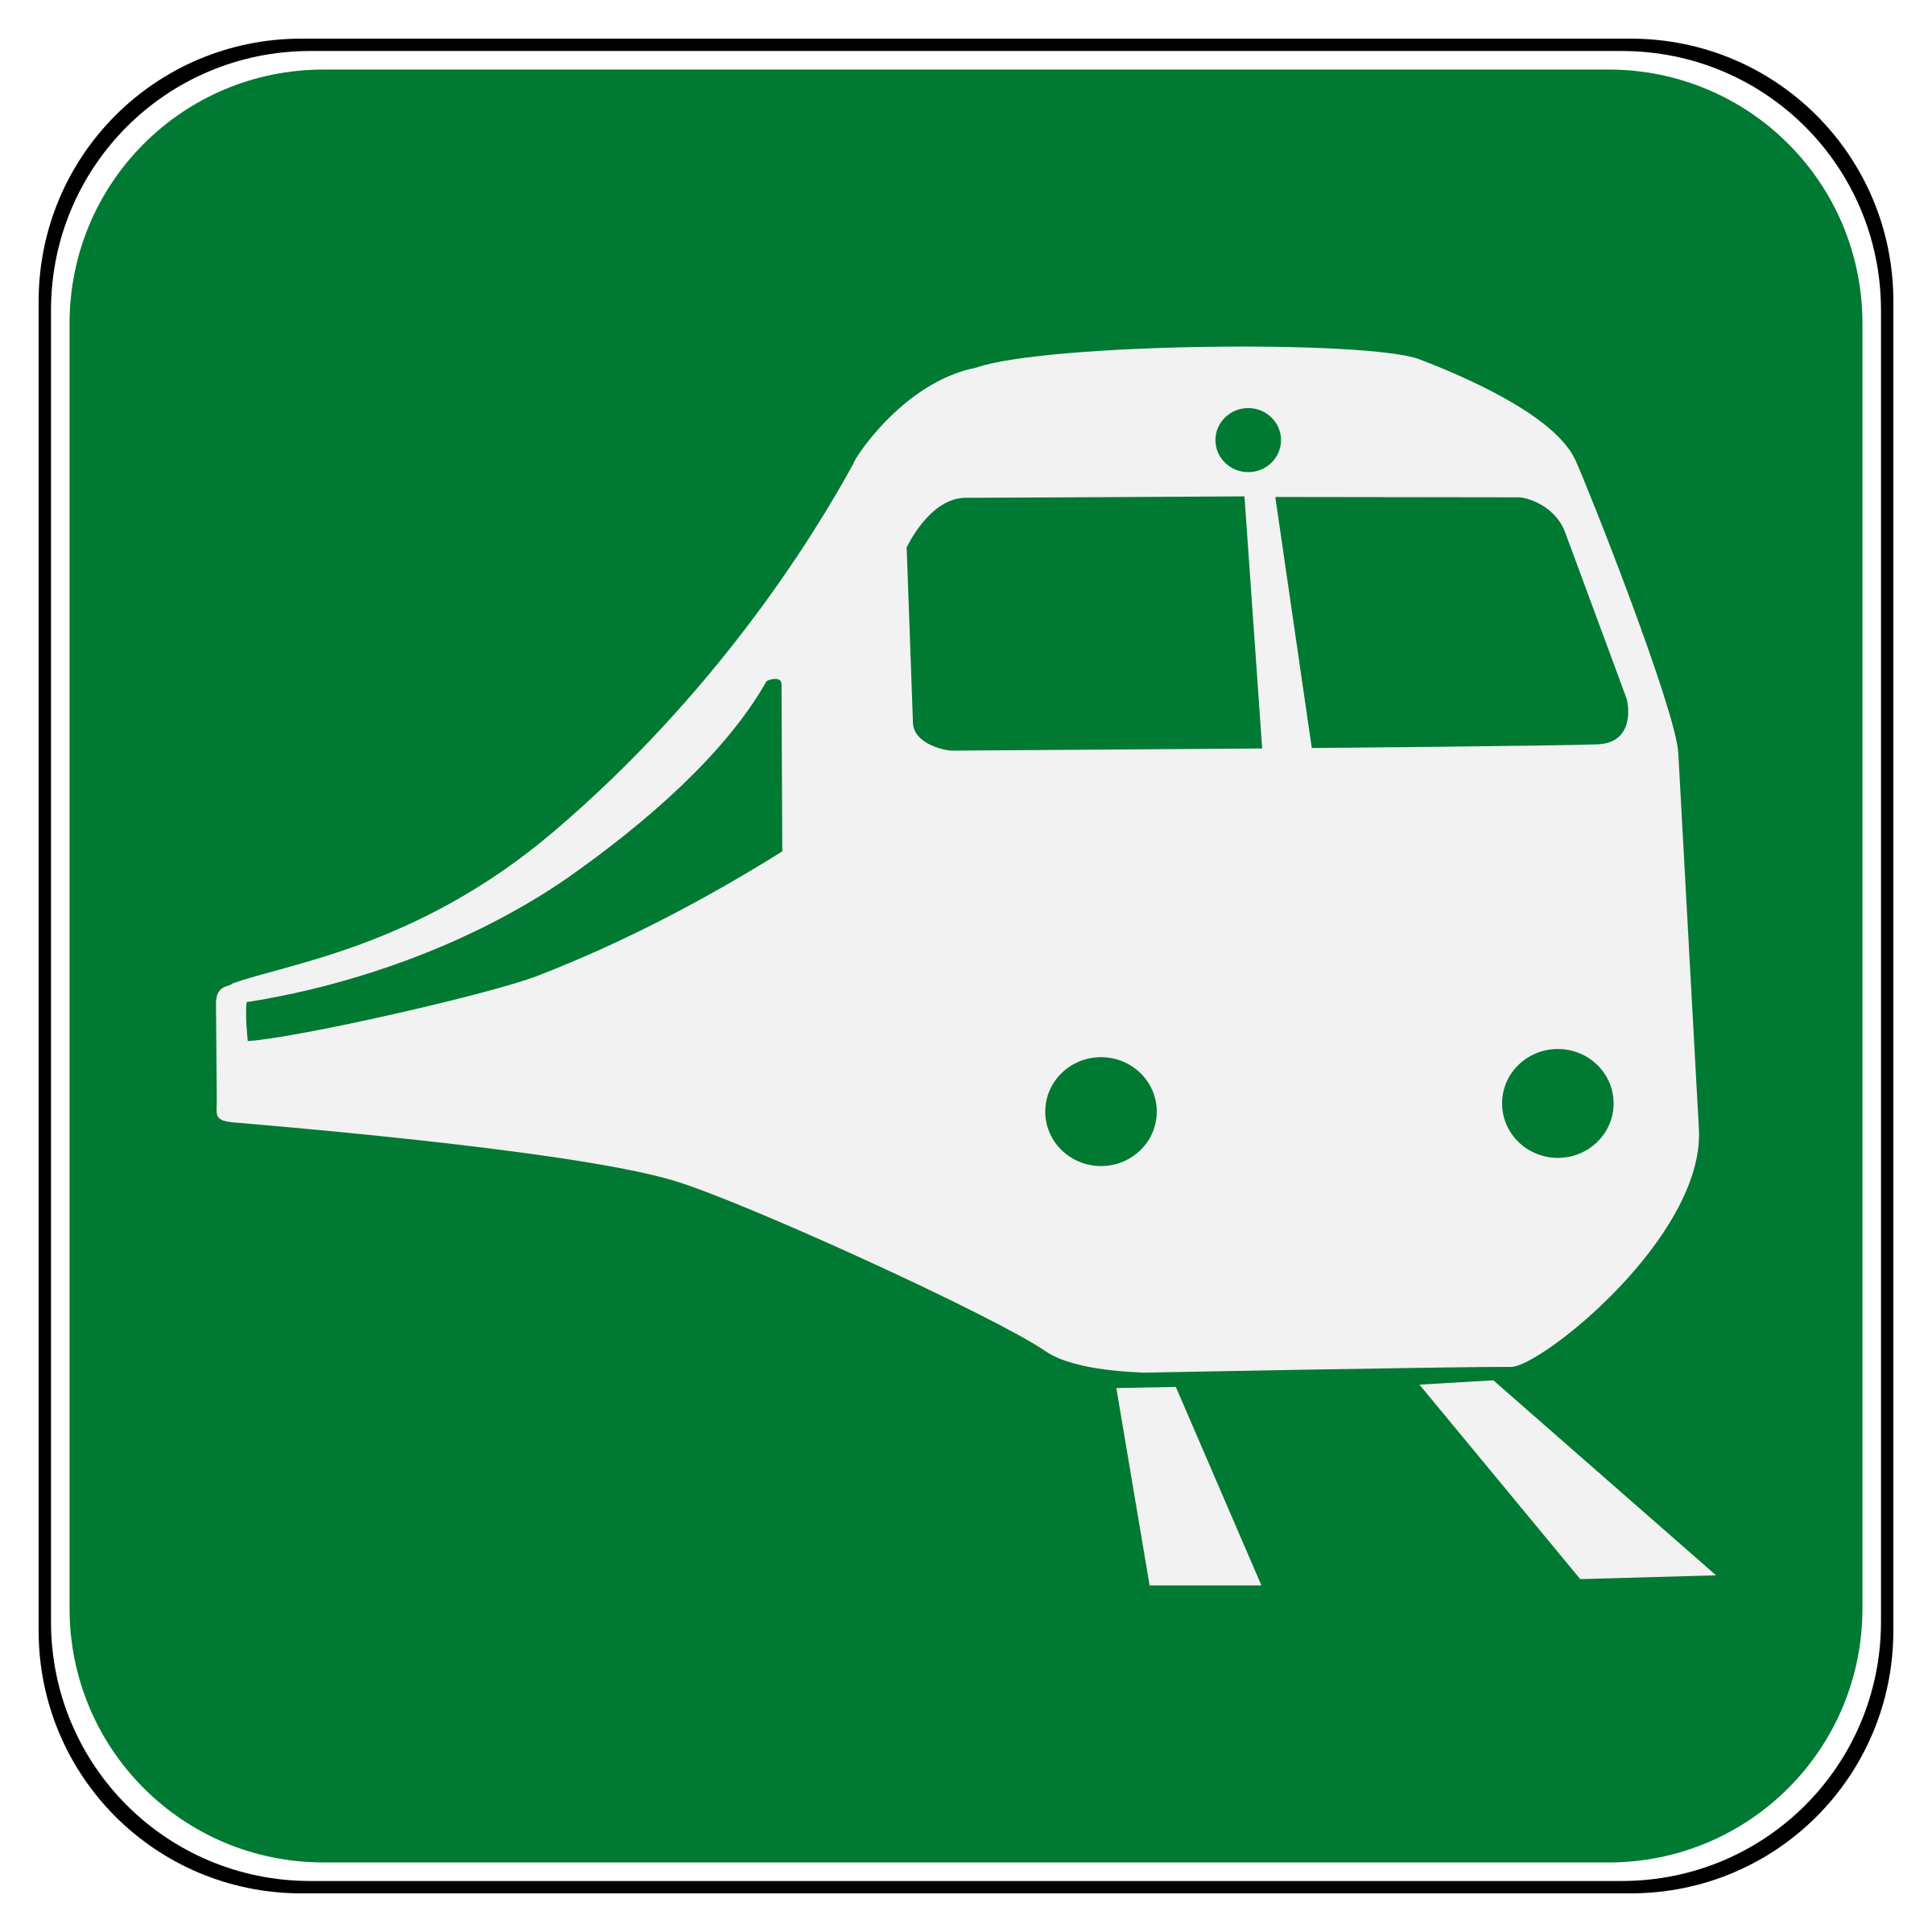 clipart of train stations - photo #15